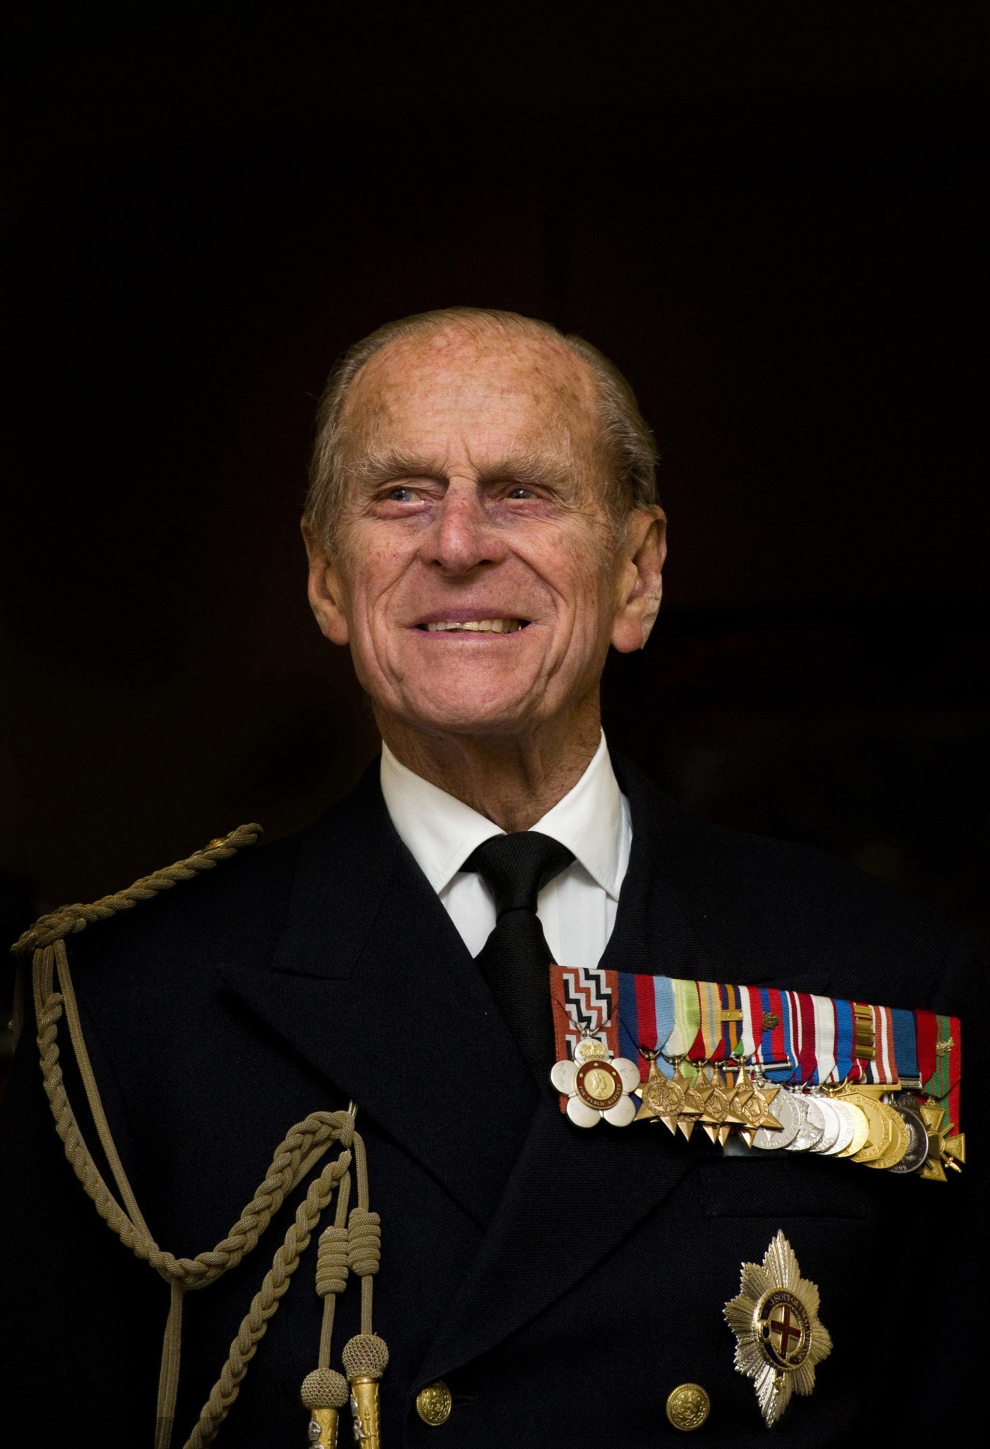 London (United Kingdom), 08/11/2012.- (FILE) - A picture dated 08 November 2012 shows Prince Philip, the Duke of Edinburgh meeting war veterans at the field of remembrance at Westminster Abbey in London, Britain. According to Royal Family, Prince Philip has died aged 99 on 09 April 2021. (Reino Unido, Edimburgo, Londres) EFE/EPA/ANDY RAIN Prince Philip dies aged 99